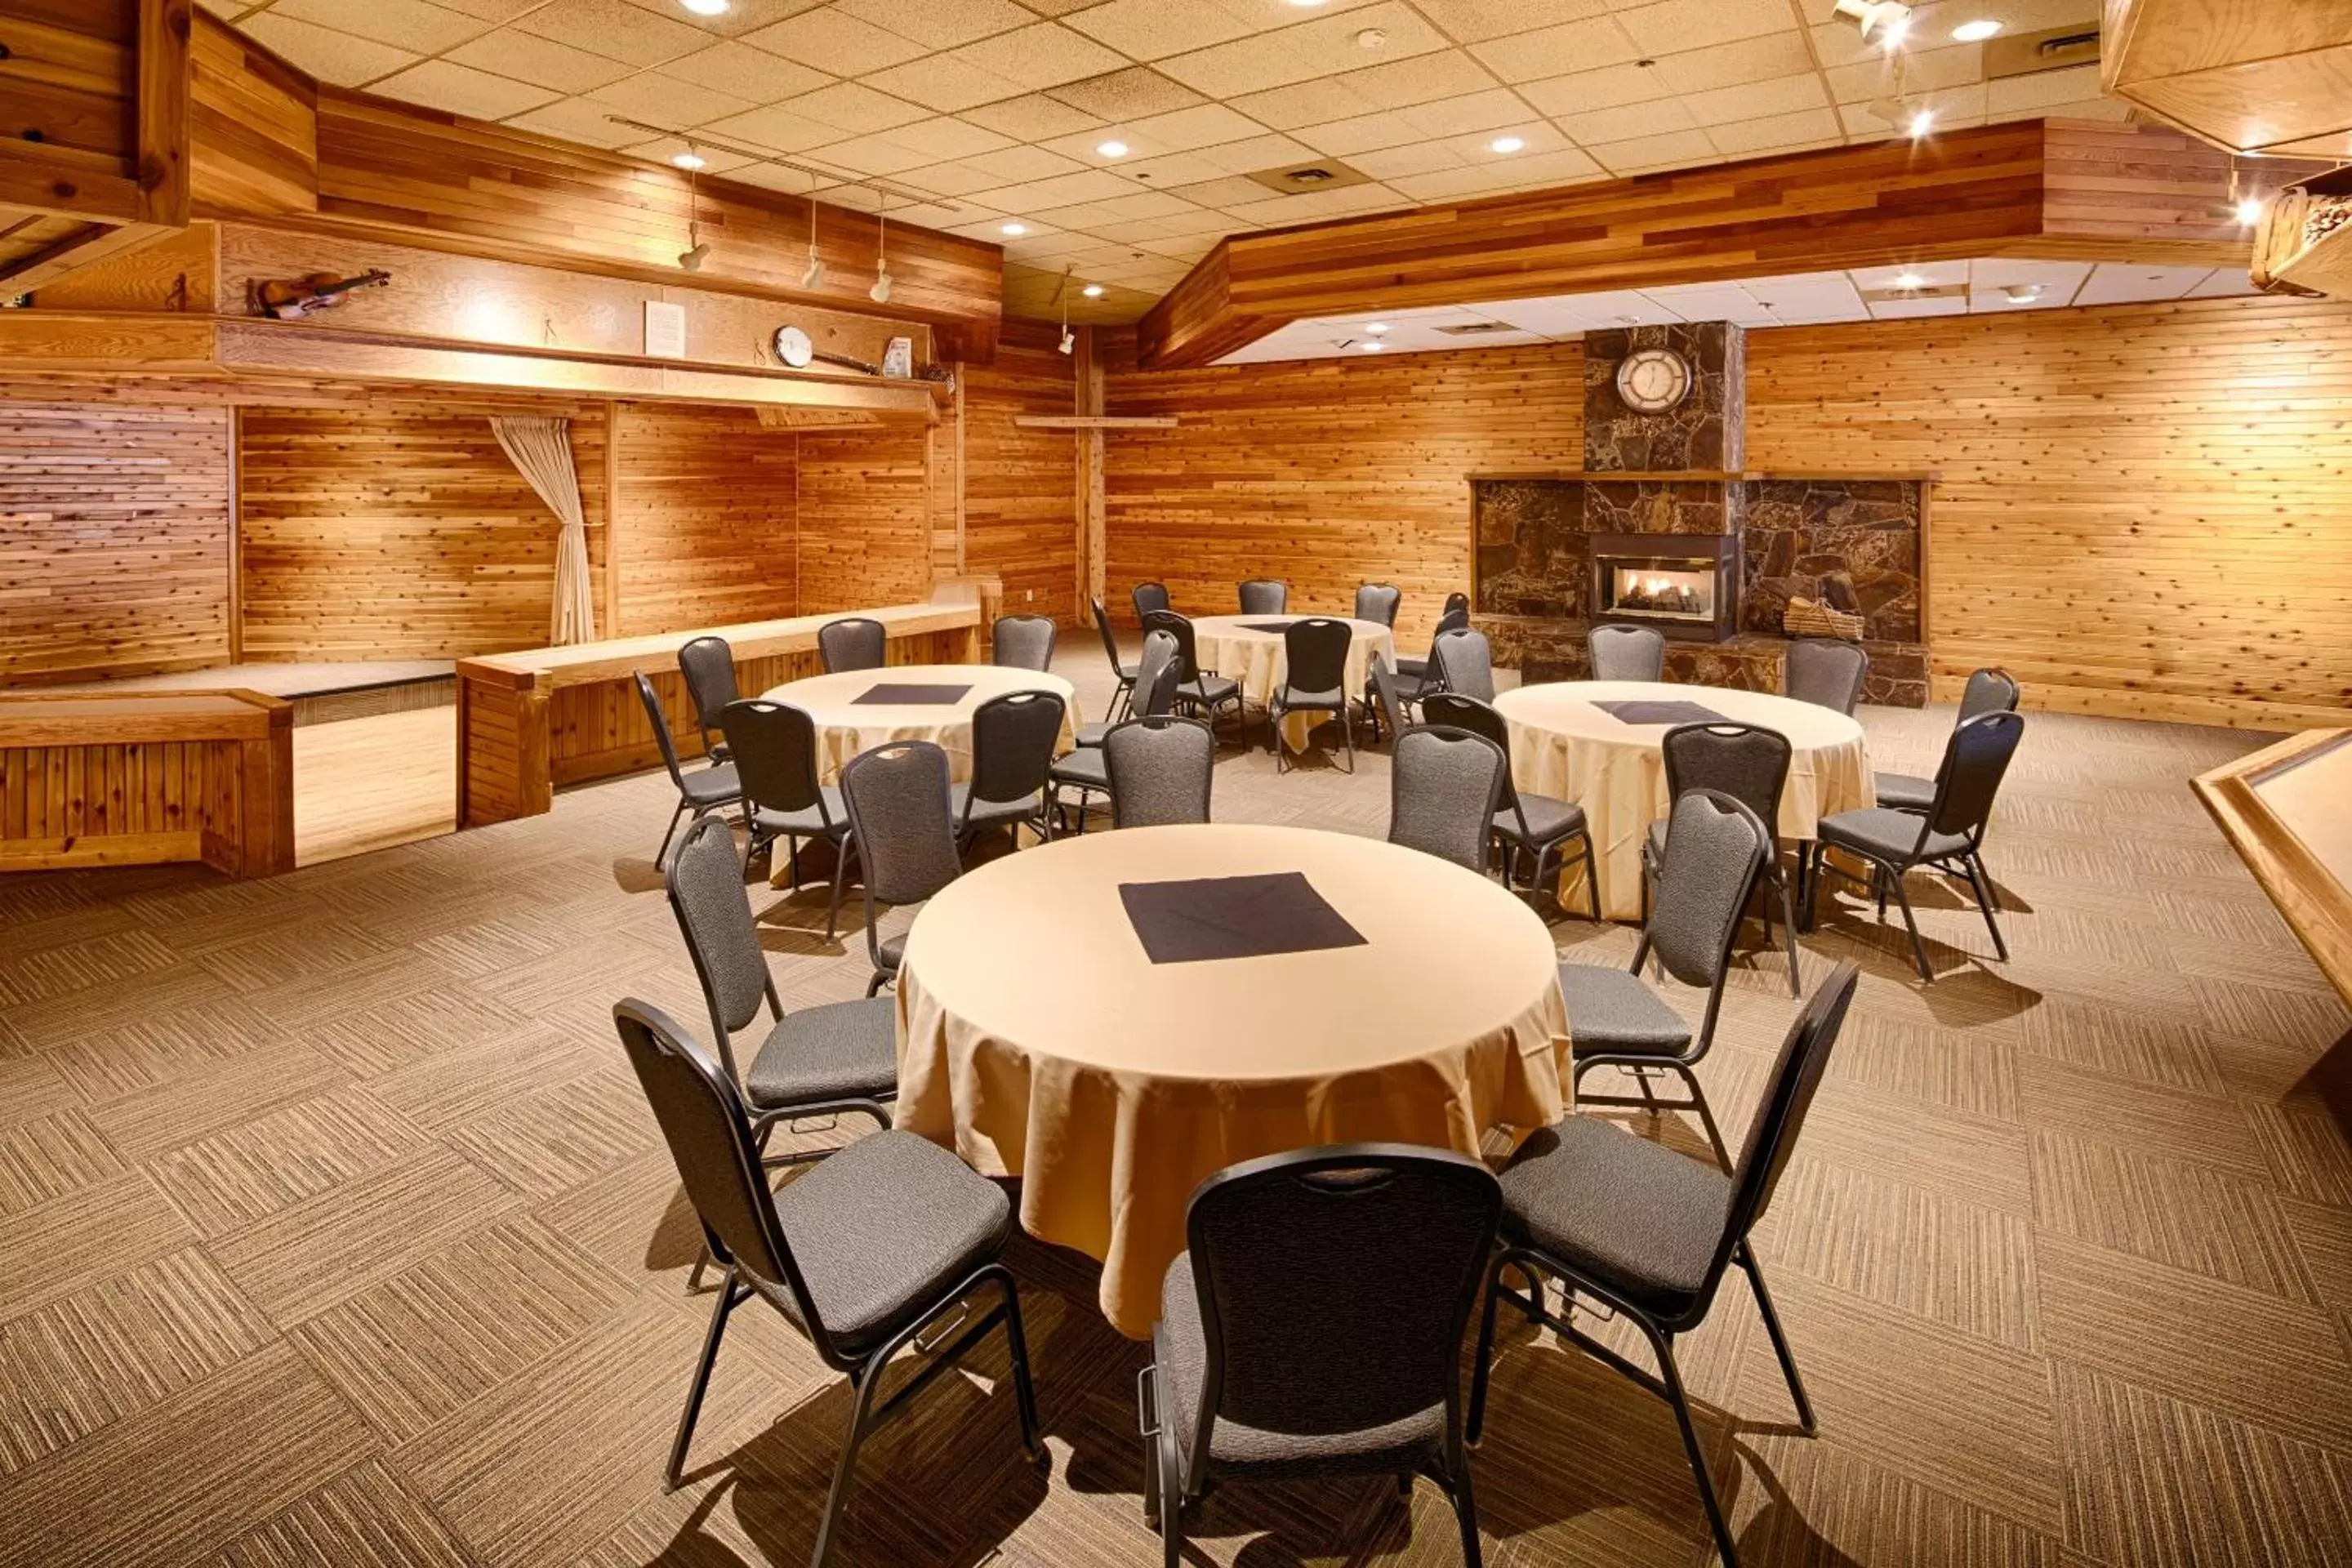 Banquet/Function facilities, Lounge/Bar in Red Lion Hotel Kalispell